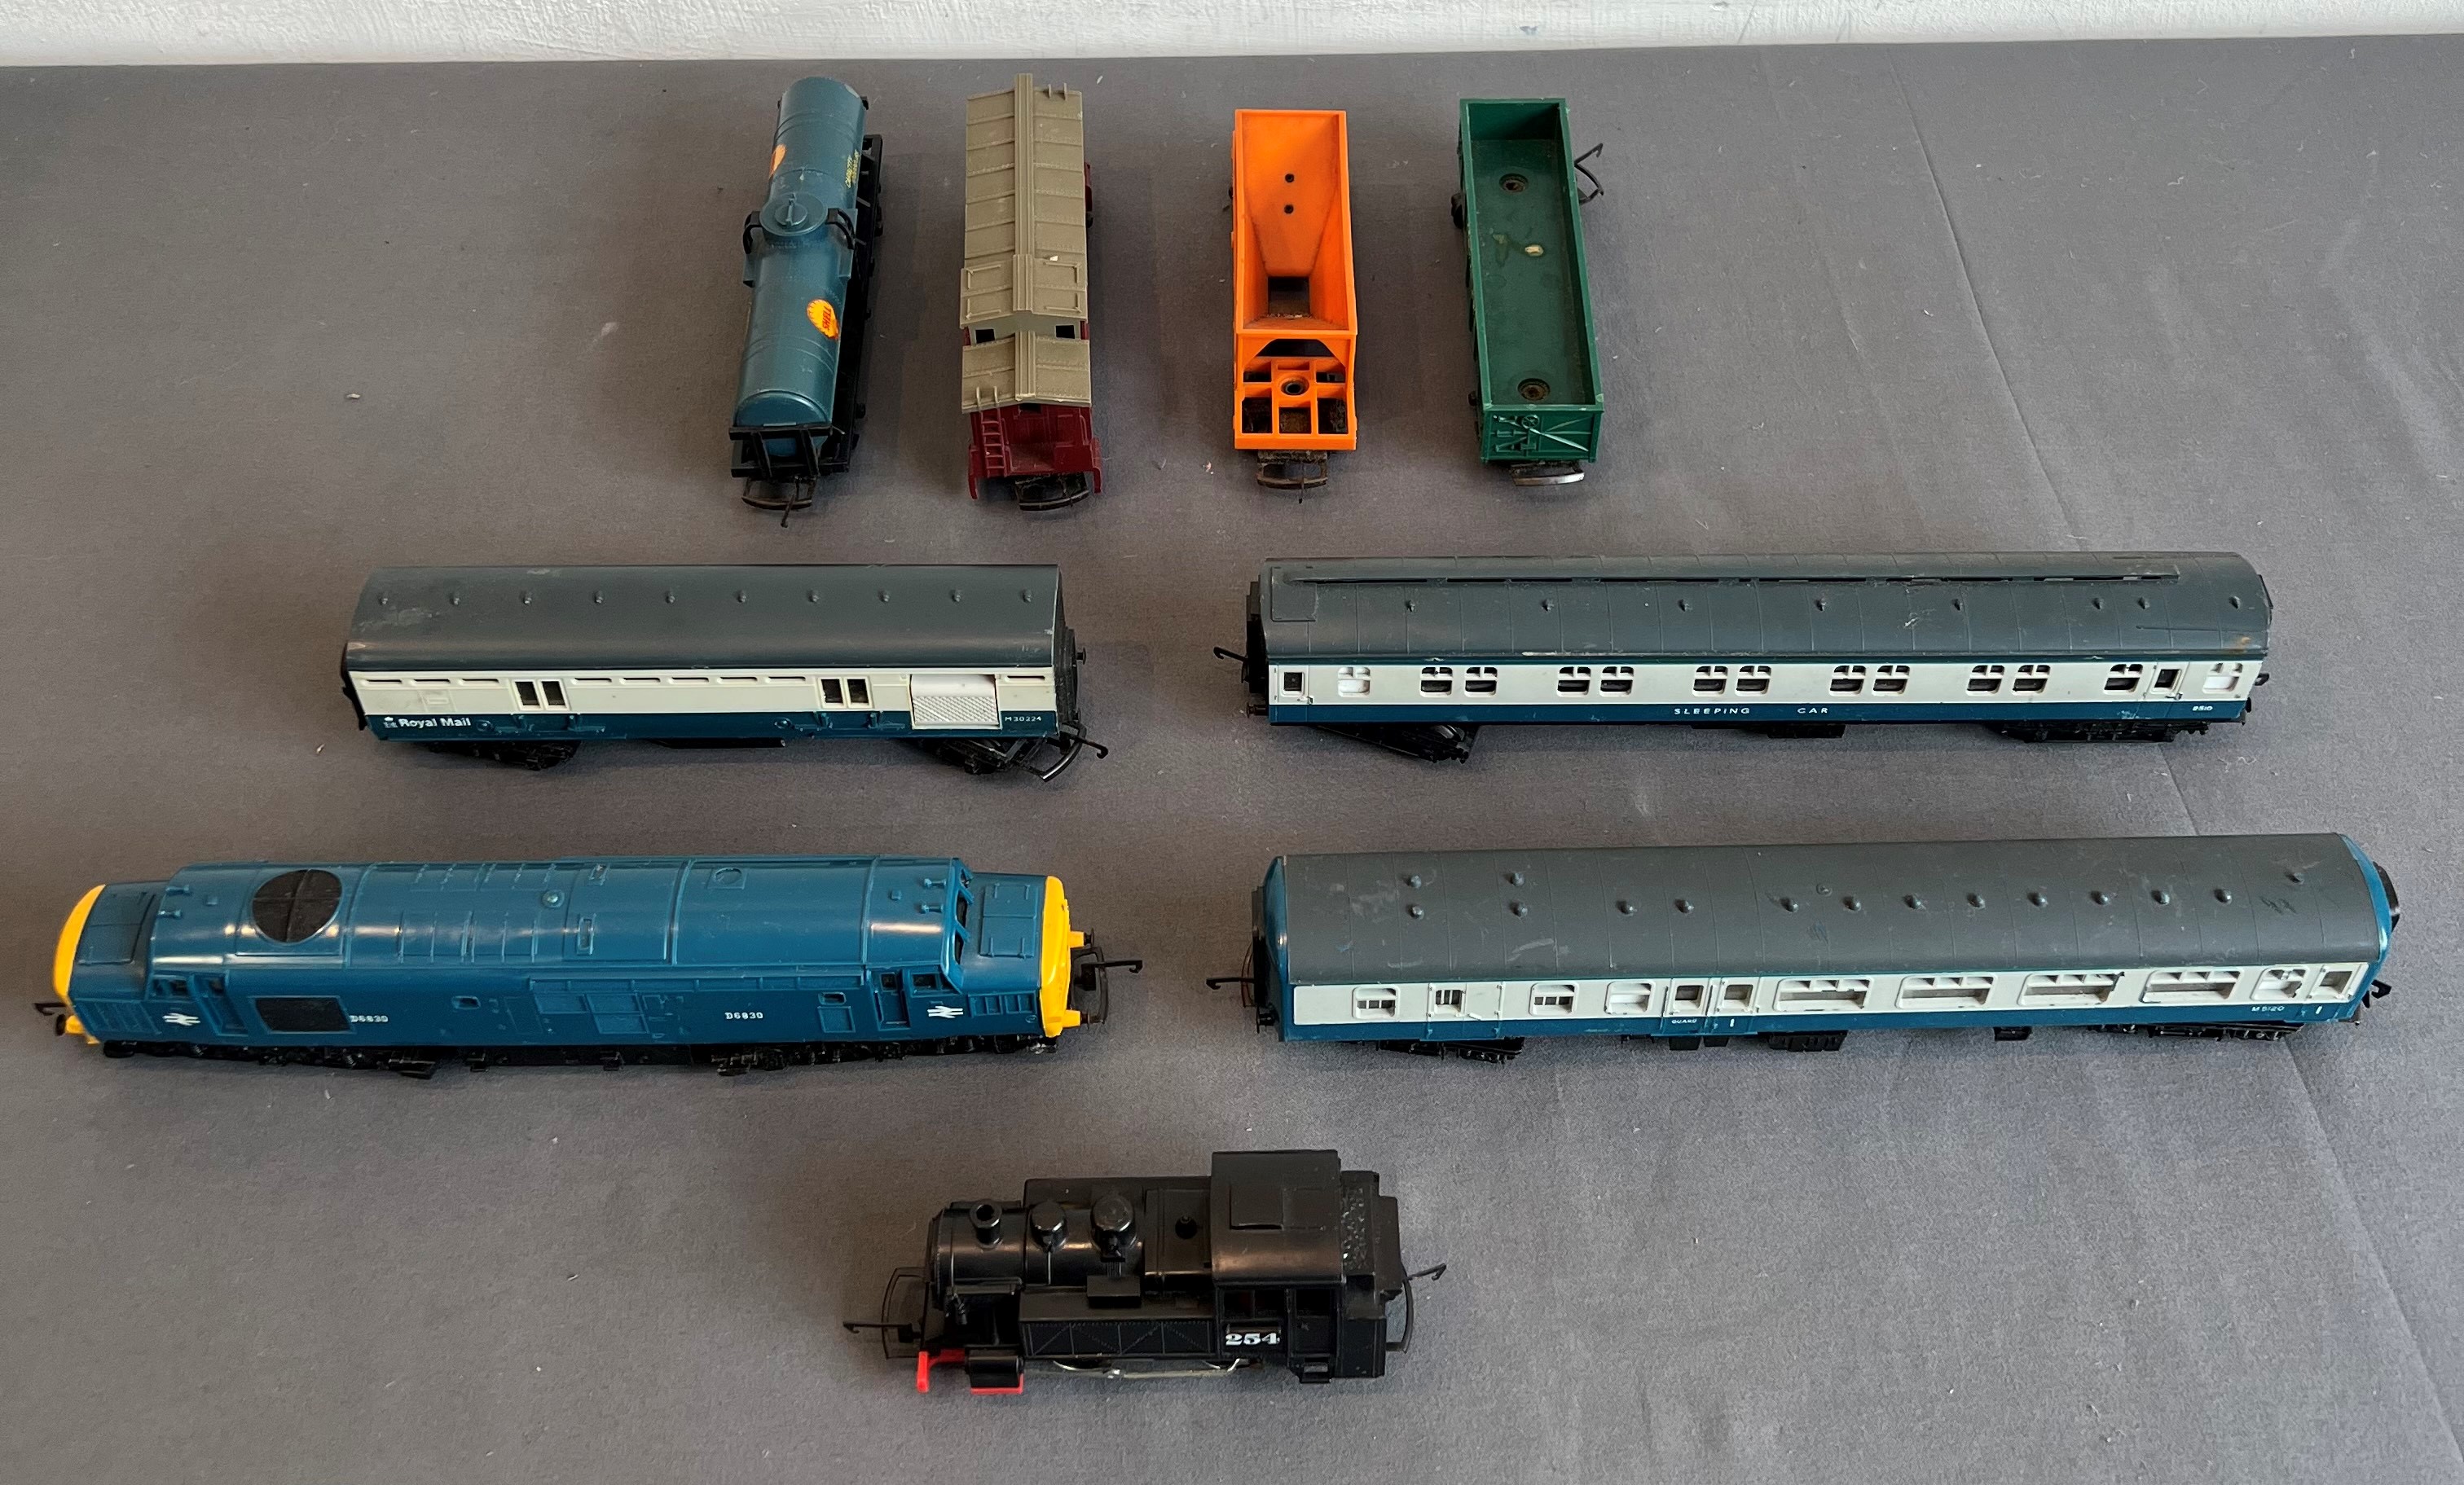 A small collection of Triang Hornby OO gauge trains - including an R751 Type 37 Co-Co diesel loco,